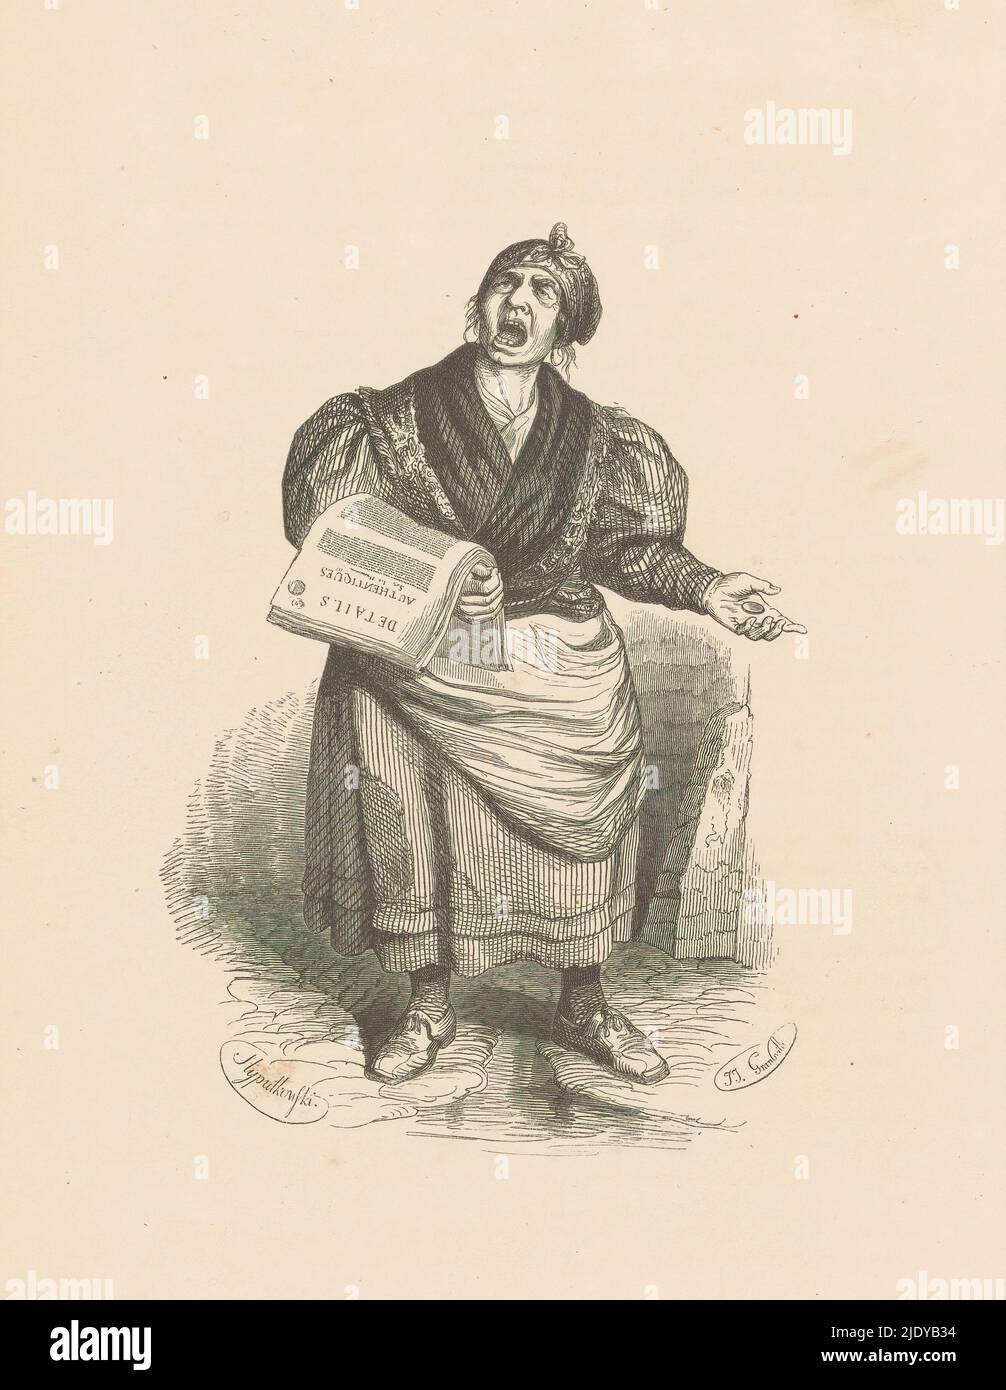 Newspaper Seller, On the street stands a woman wearing a headscarf. Over her right arm is a stack of newspapers., print maker: Lucien Xavier Stypulkowski, (mentioned on object), after design by: Jean Ignace Isidore Gérard Grandville, (mentioned on object), 1816 - 1849, paper, height 258 mm × width 175 mm Stock Photo